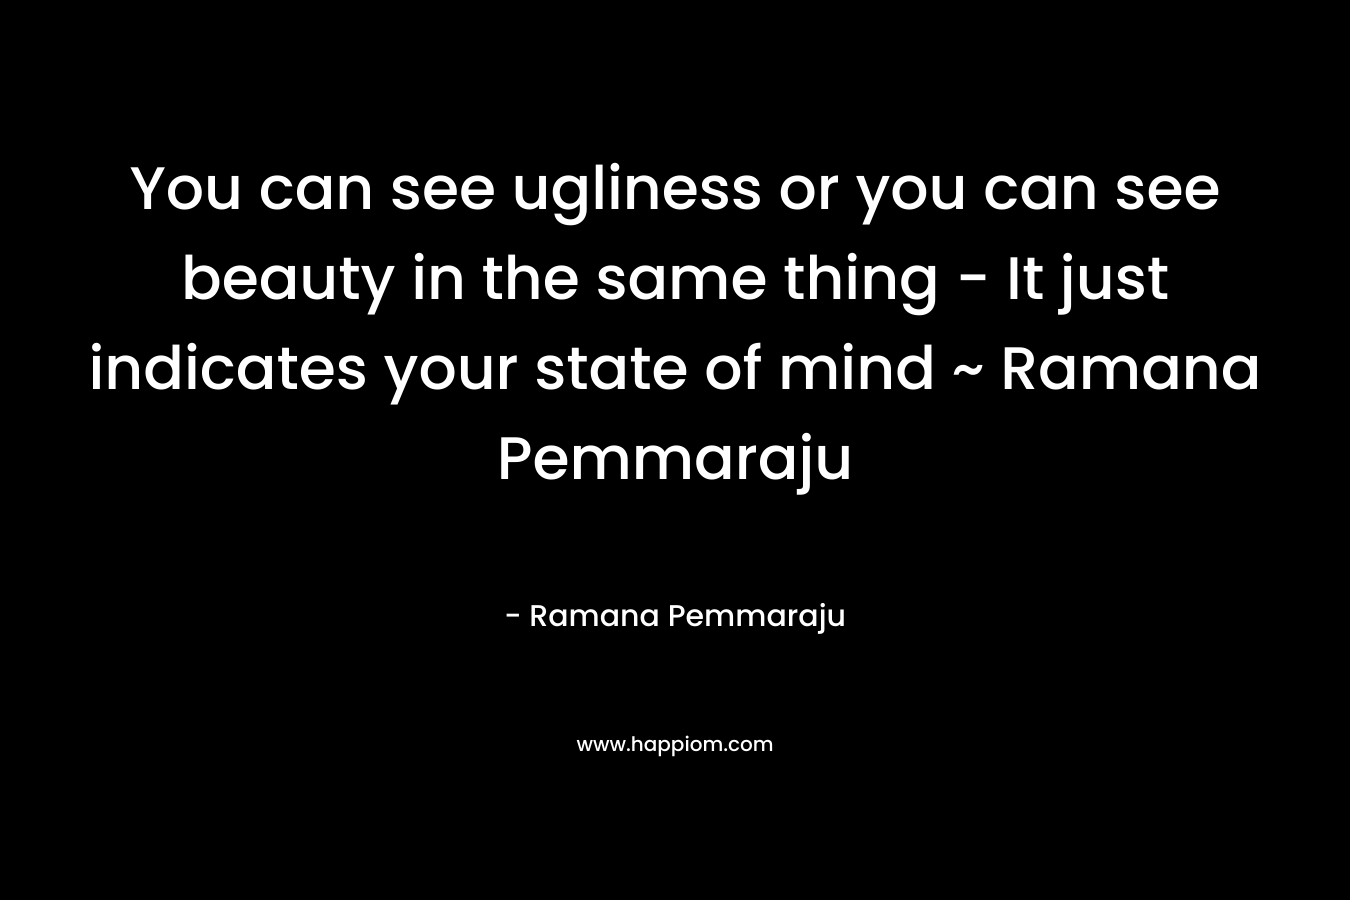 You can see ugliness or you can see beauty in the same thing - It just indicates your state of mind ~ Ramana Pemmaraju